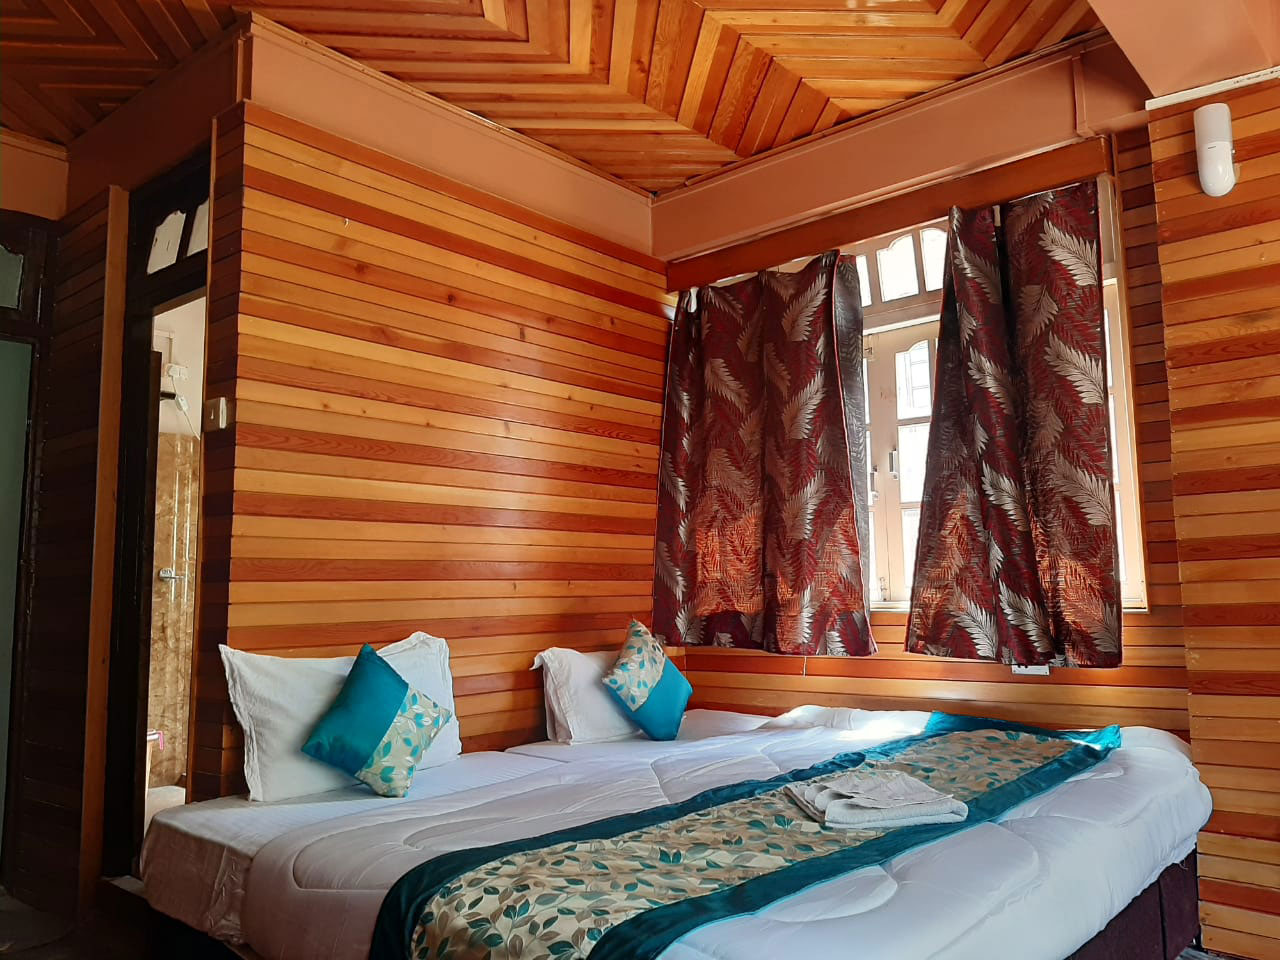 Hotel The Kyipshong in Lachung, Best Hotel to Stay in Lachung, Call:+919083596122 Book your stay in Lachung, List of Family Hotels to stay in Lachung, Book Hotel at B2B Price, Top Hotels in Lachung for Accommodation